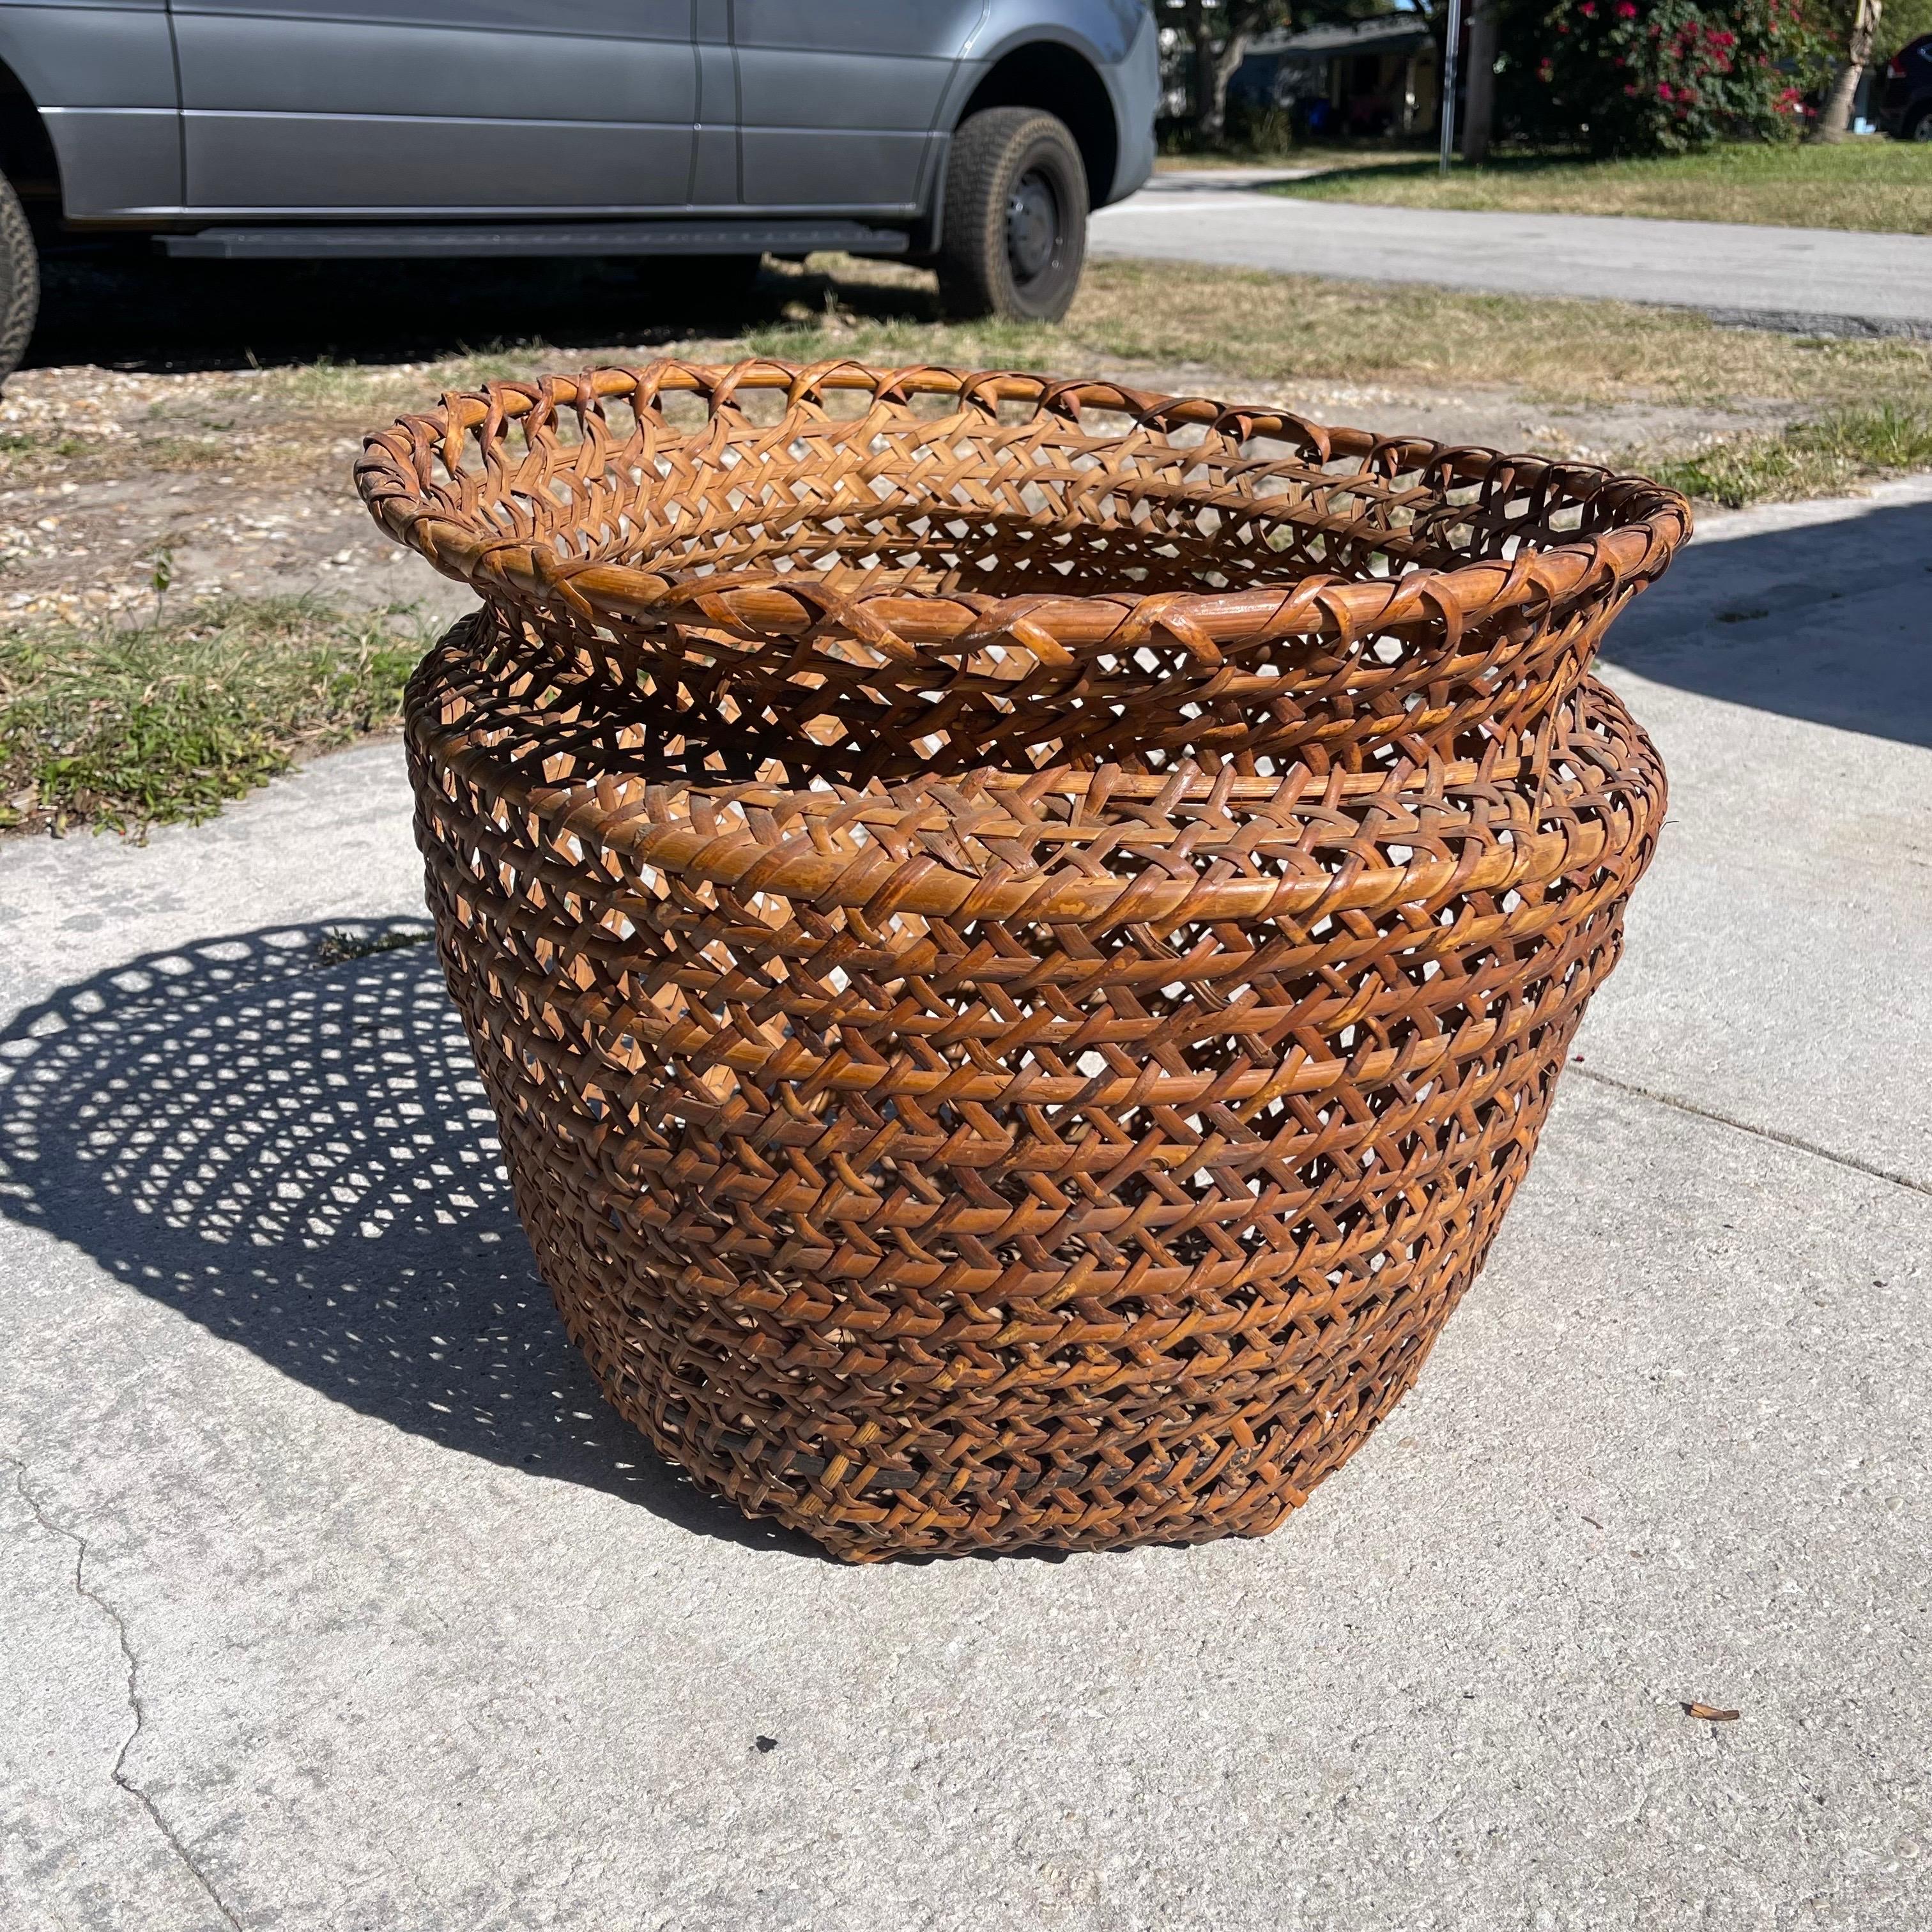 Charming hand-woven cane basket.